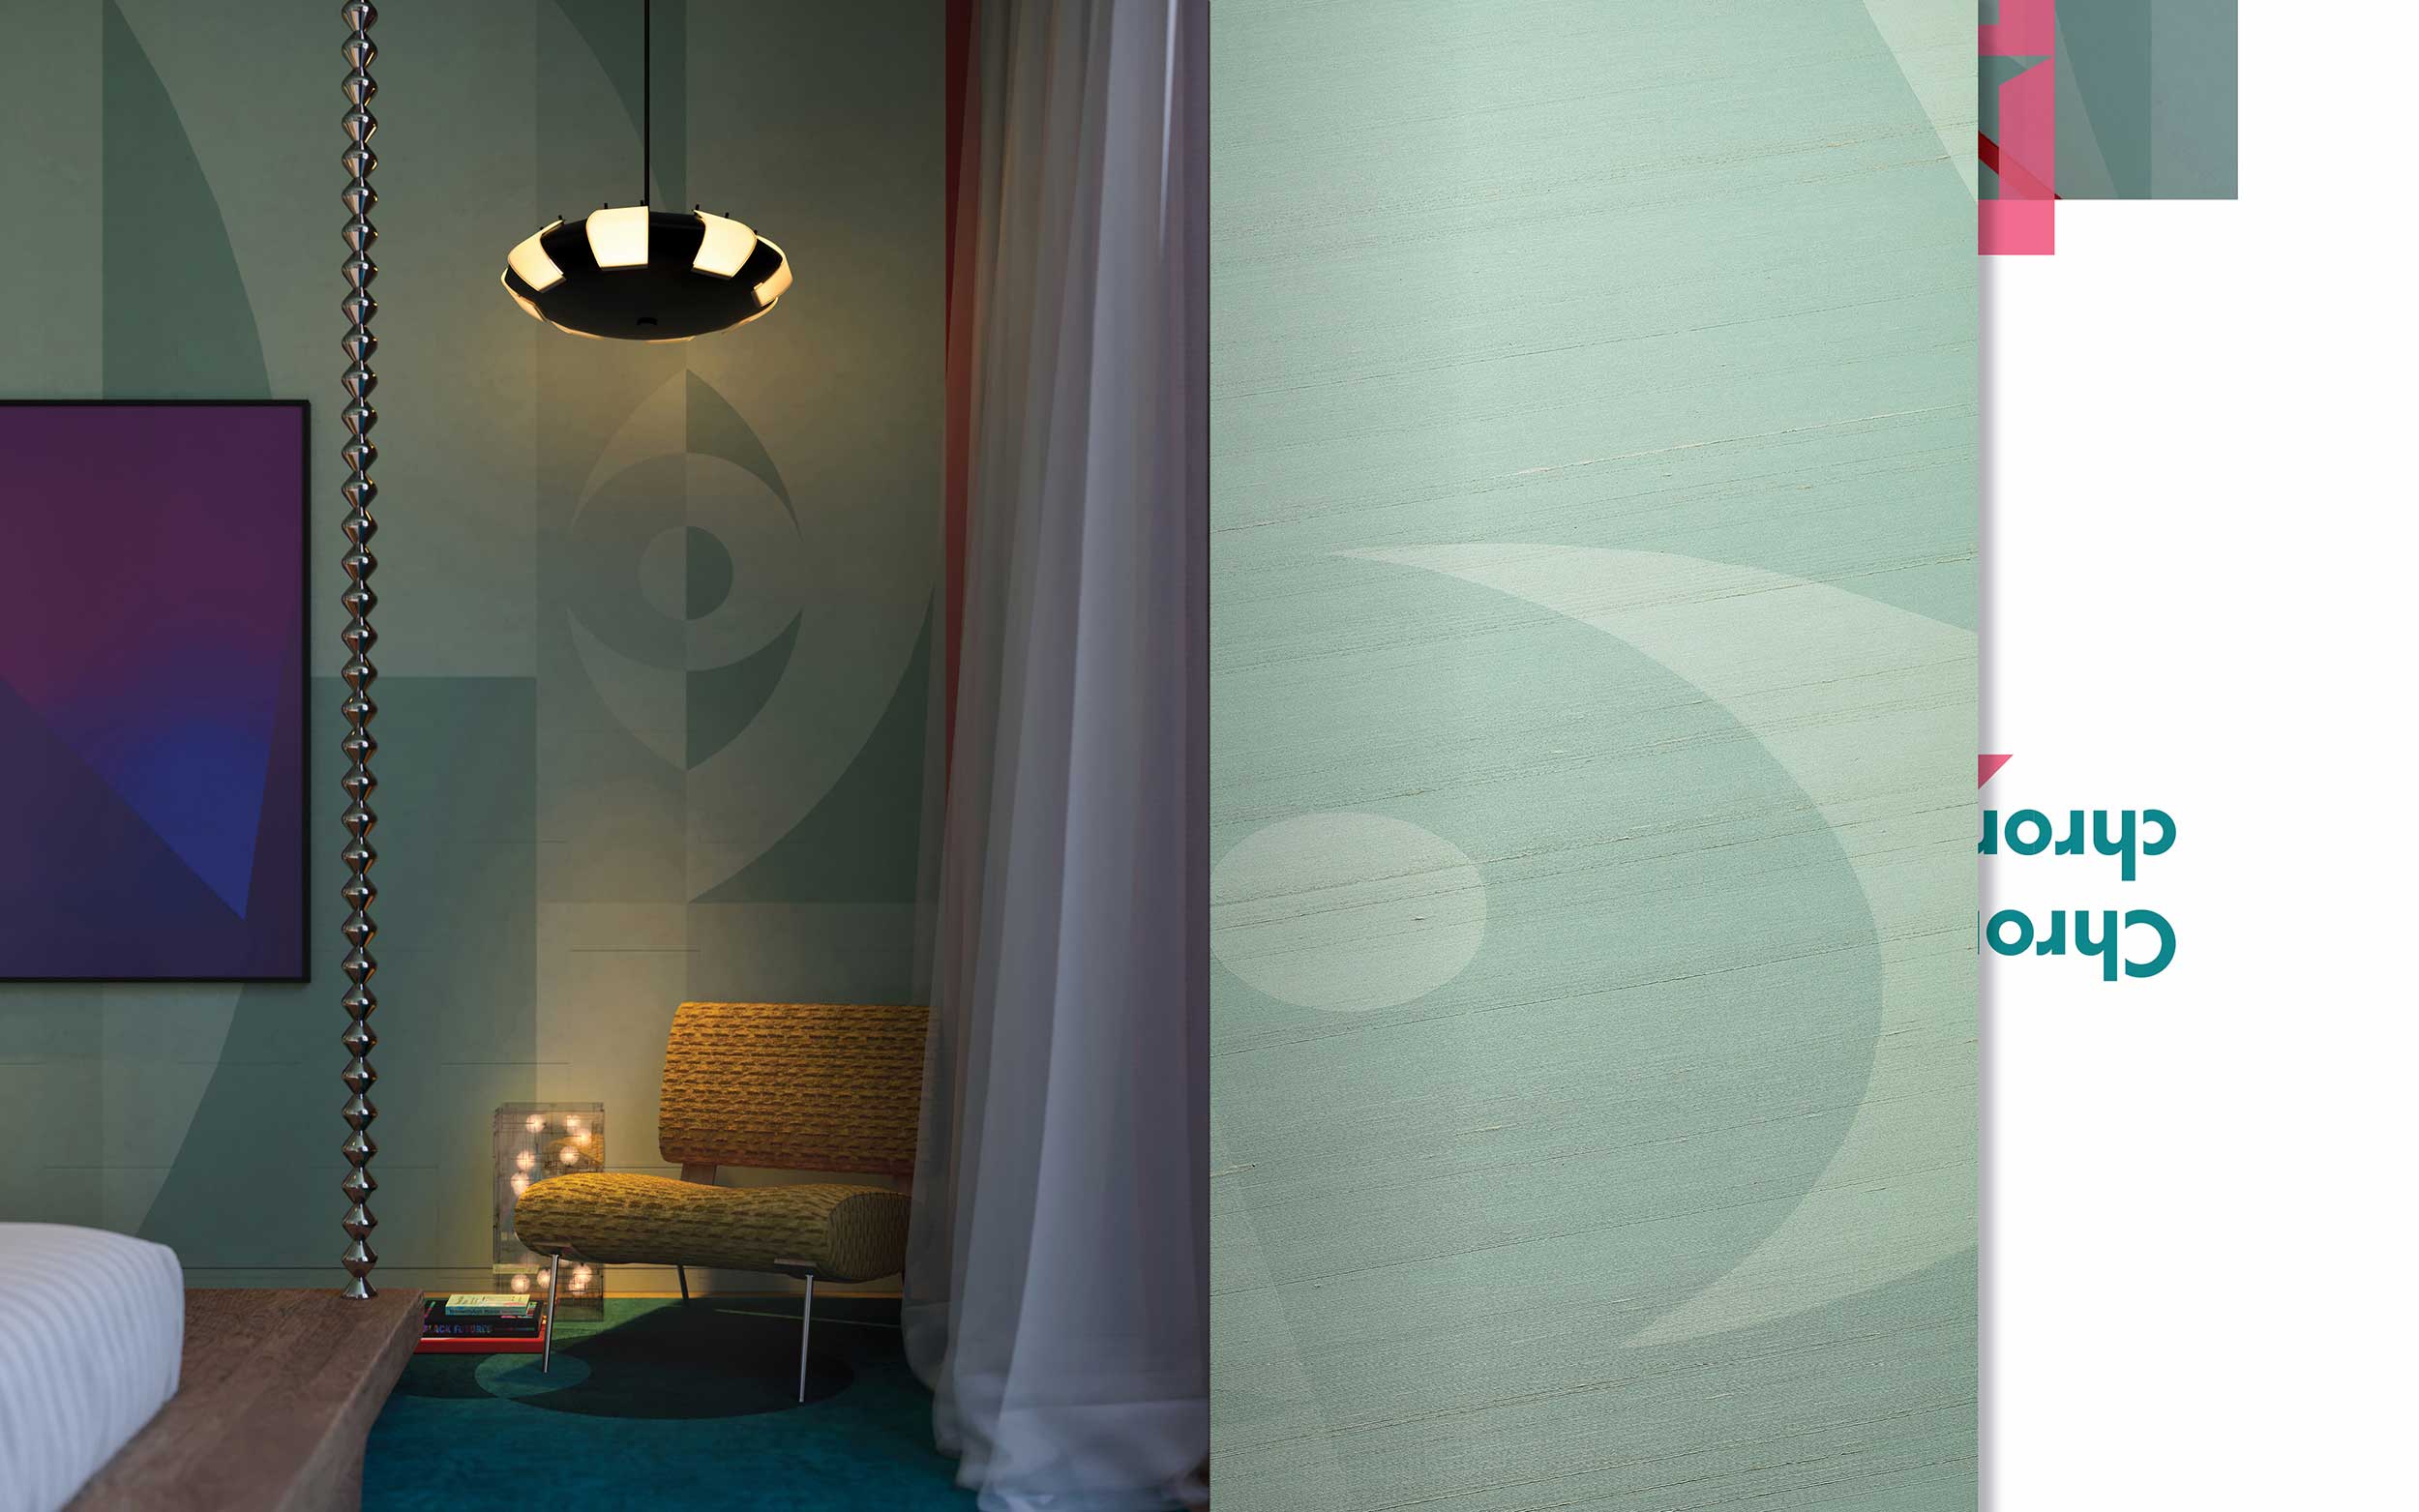 Zine spread showing virtual apartment interior with pale greens and deep purples, next to a detail of a graphic eye-shaped wall covering